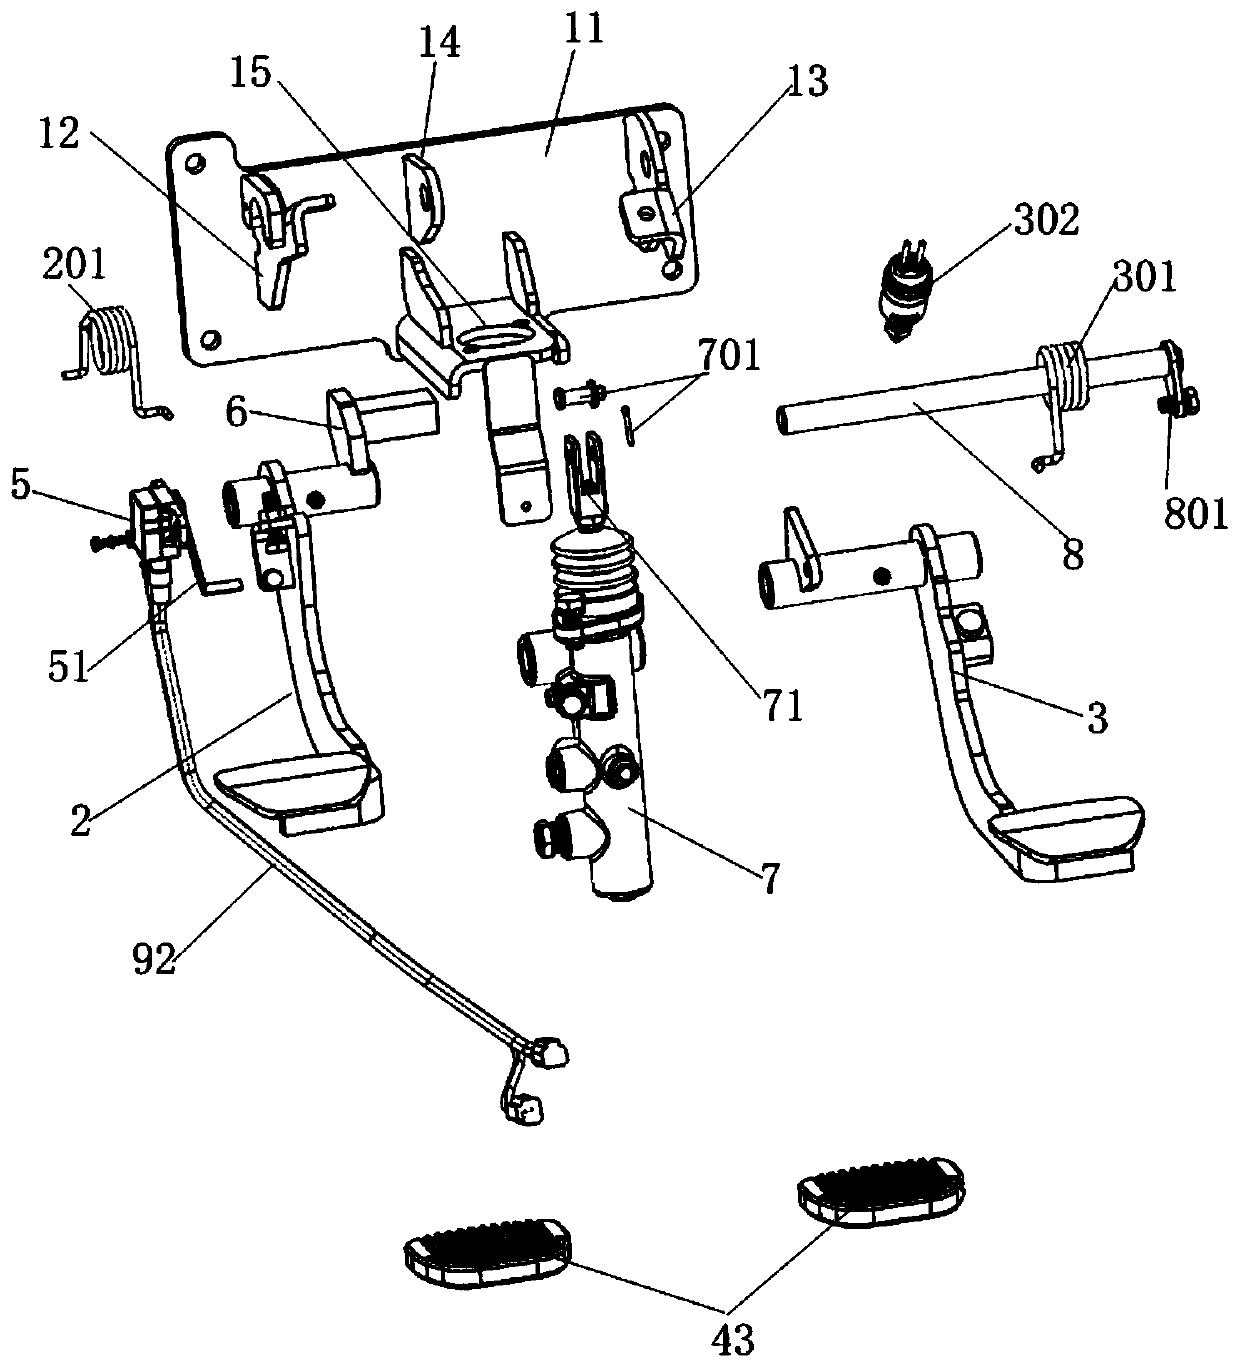 Electronic micro-moving and braking system for forklift